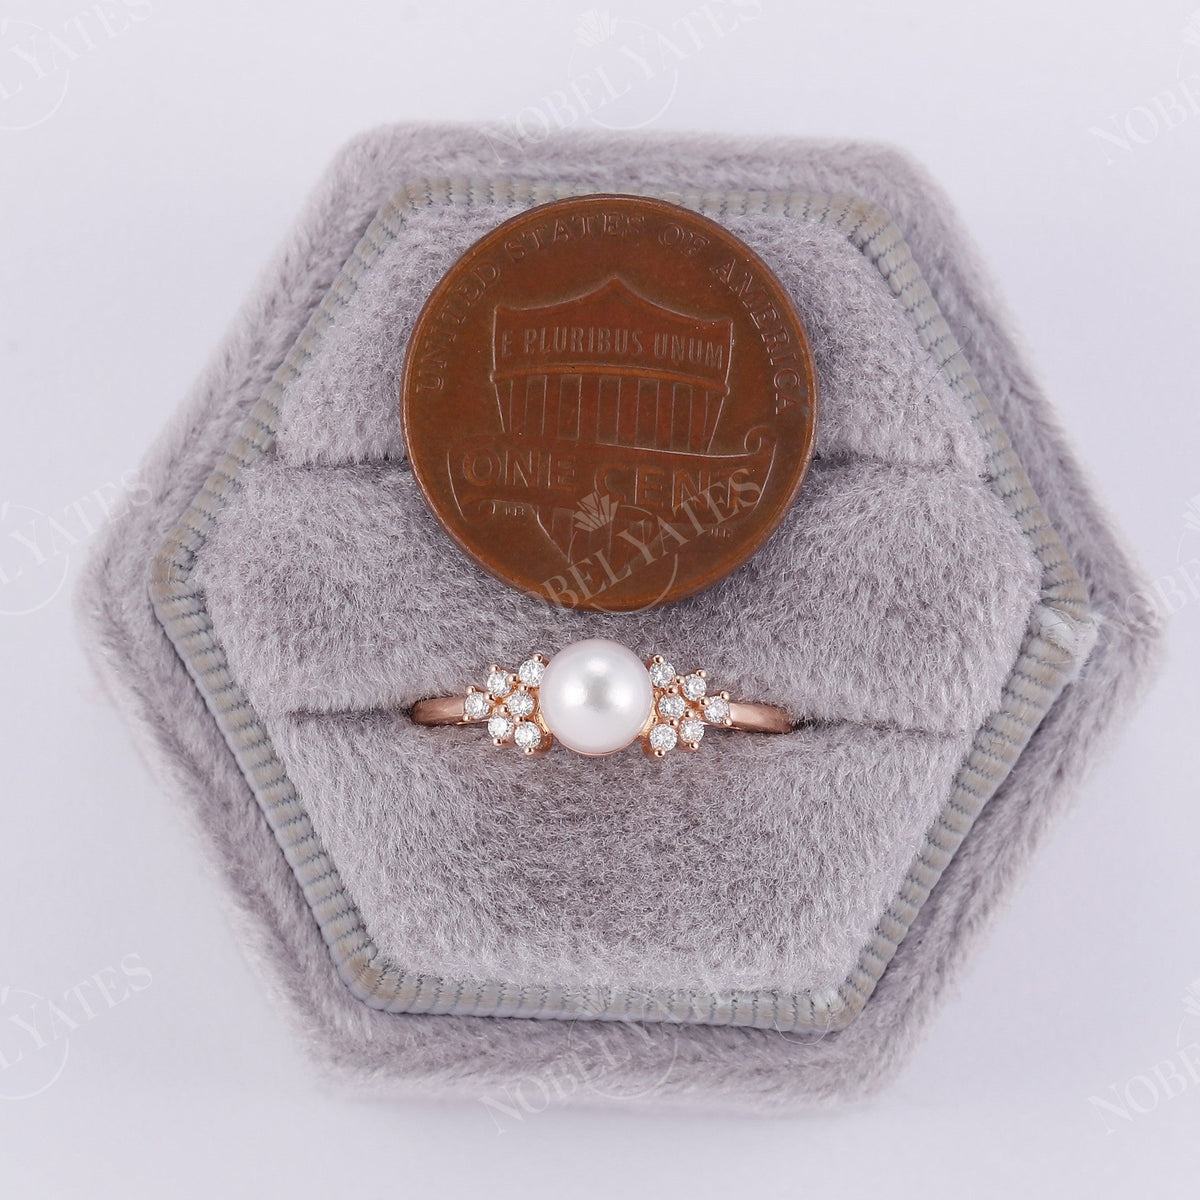 Akoya Pearl Side Stone Engagement Ring Rose Gold